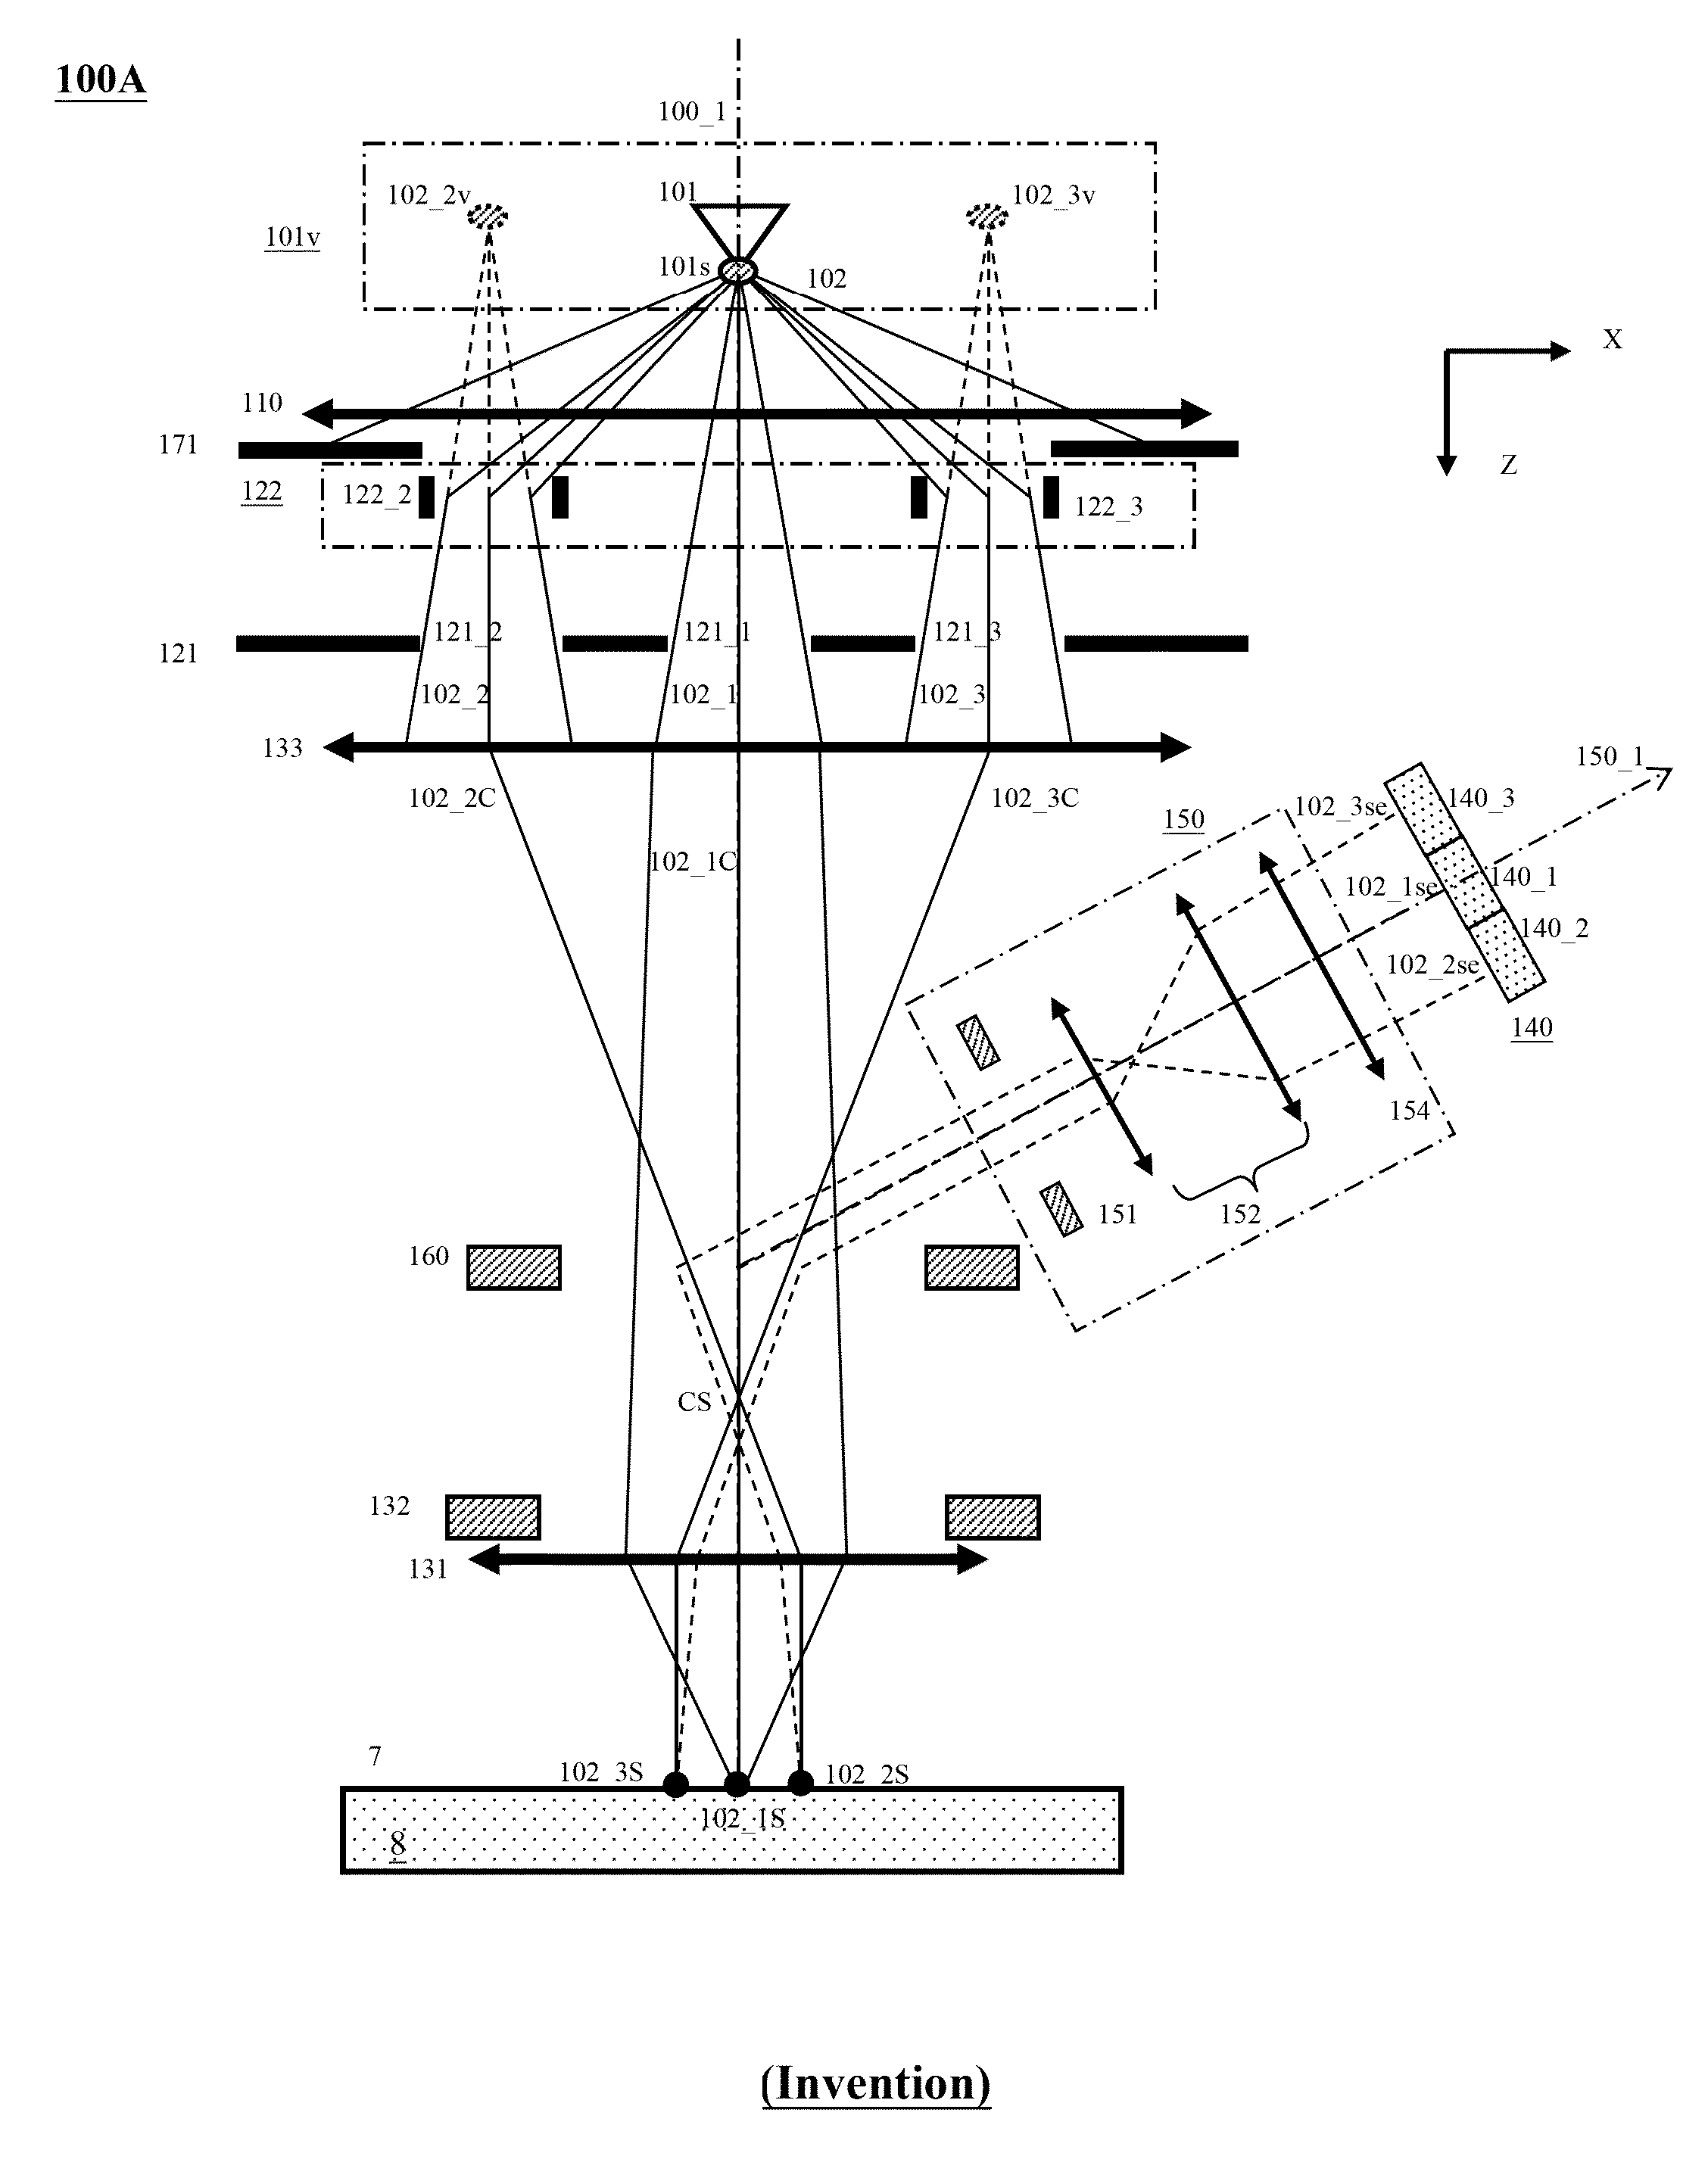 Apparatus of Plural Charged-Particle Beams